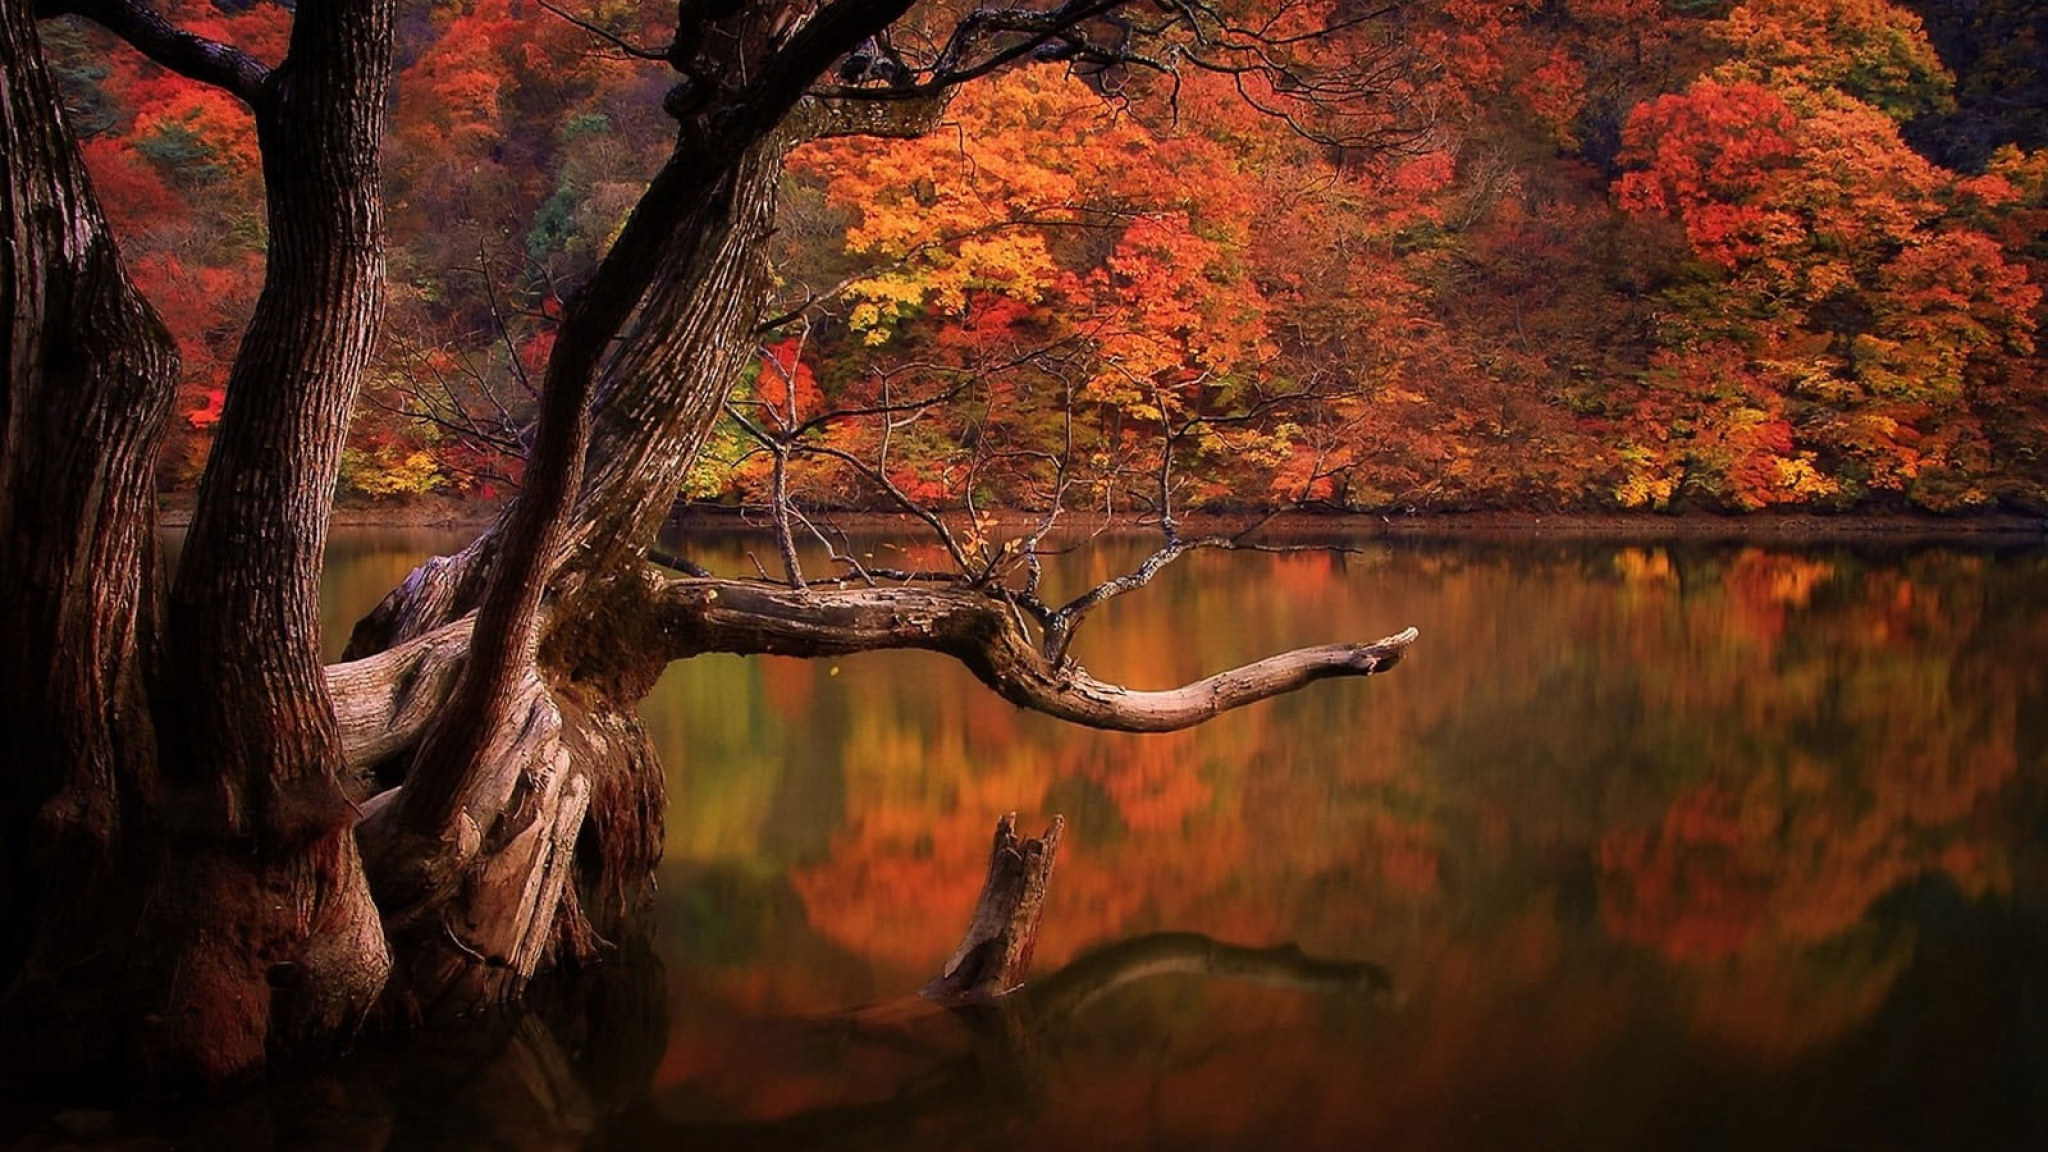 Brown Body Of Water Wallpaper, Lake, Fall, Forest, Dead Trees, Reflection • Wallpaper For You